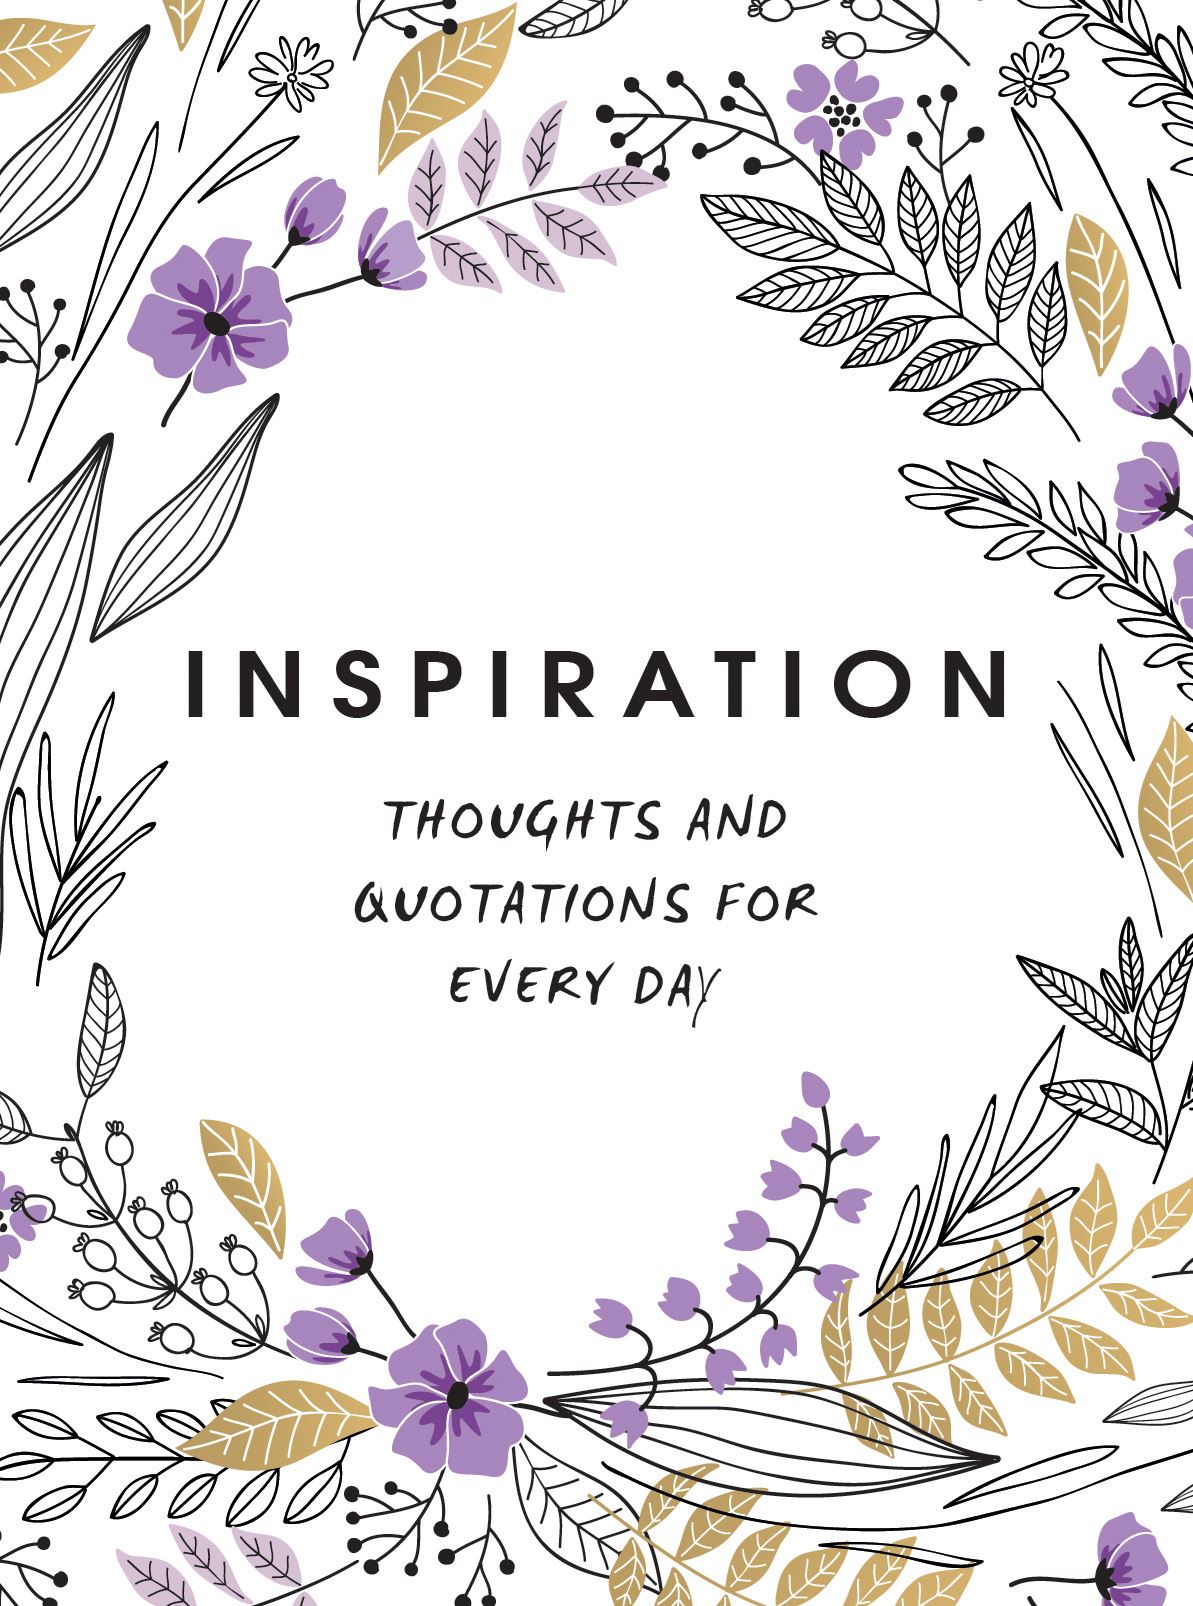 Inspiration: Thoughts and Quotations